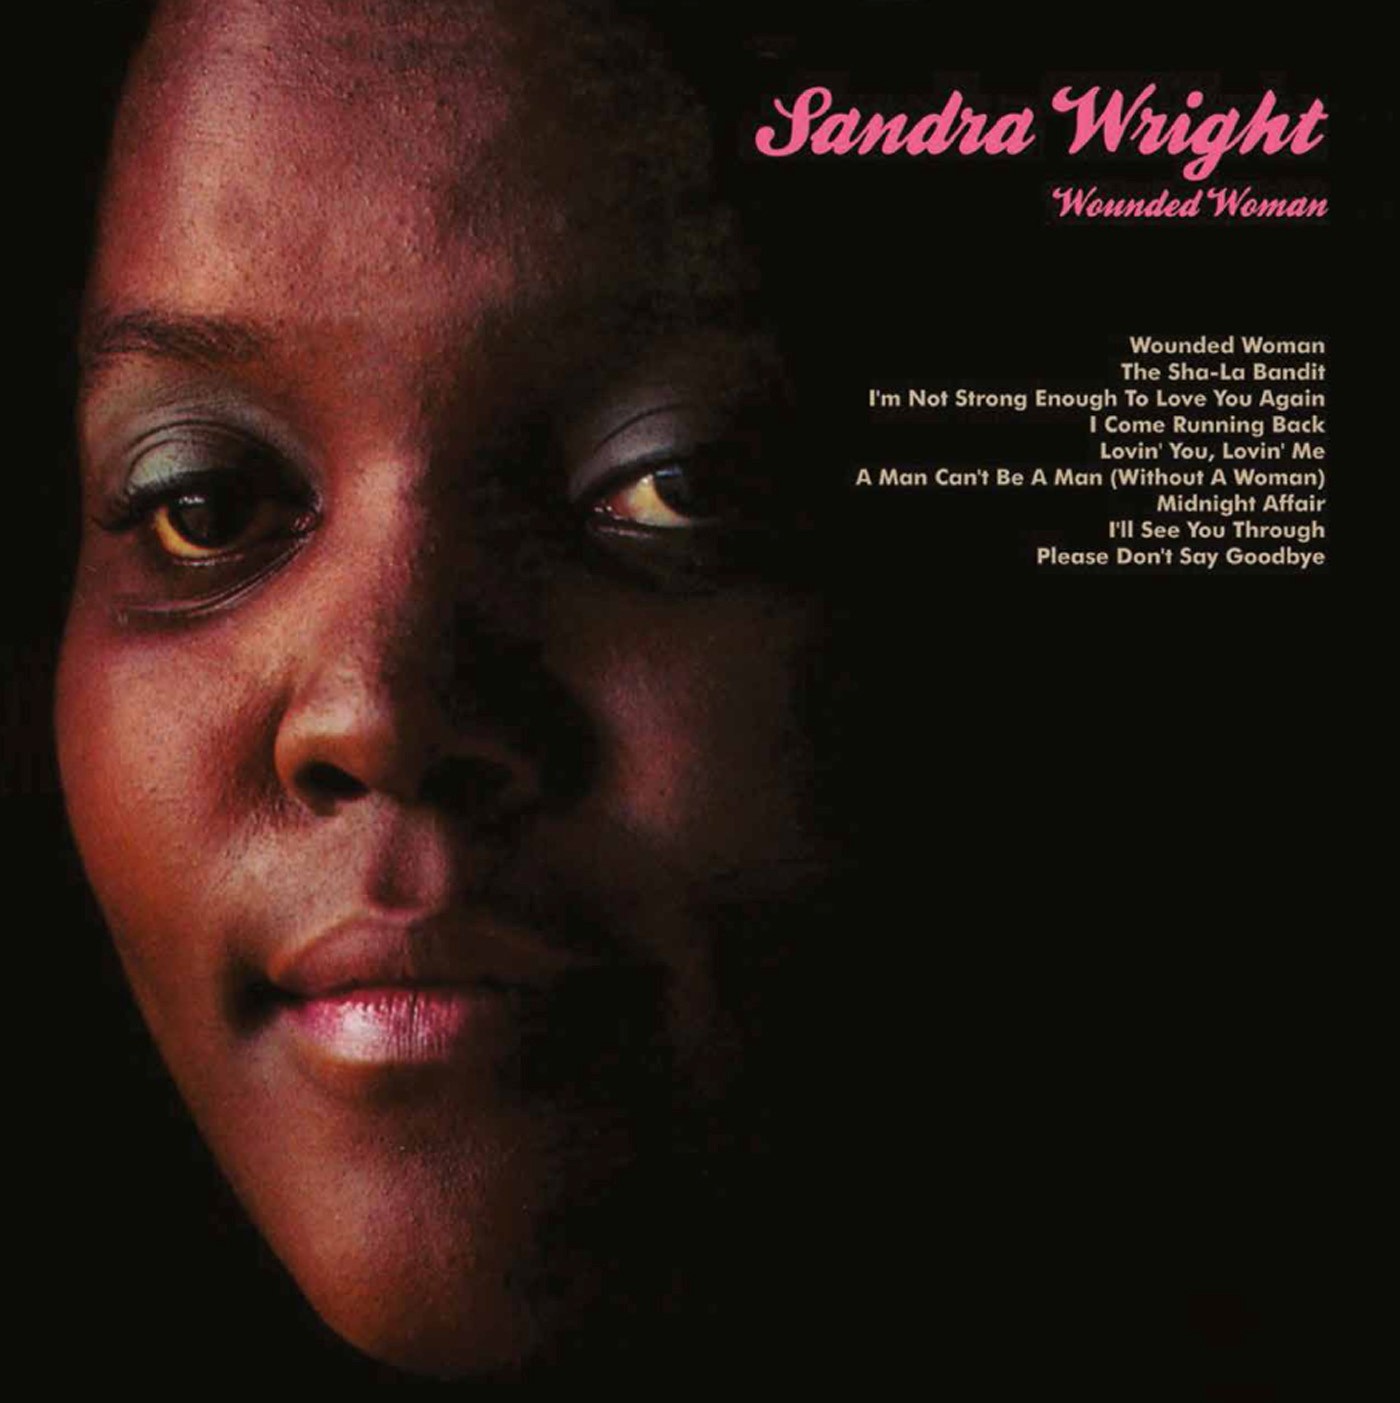 Sandra Wright/WOUNDED WOMAN CD